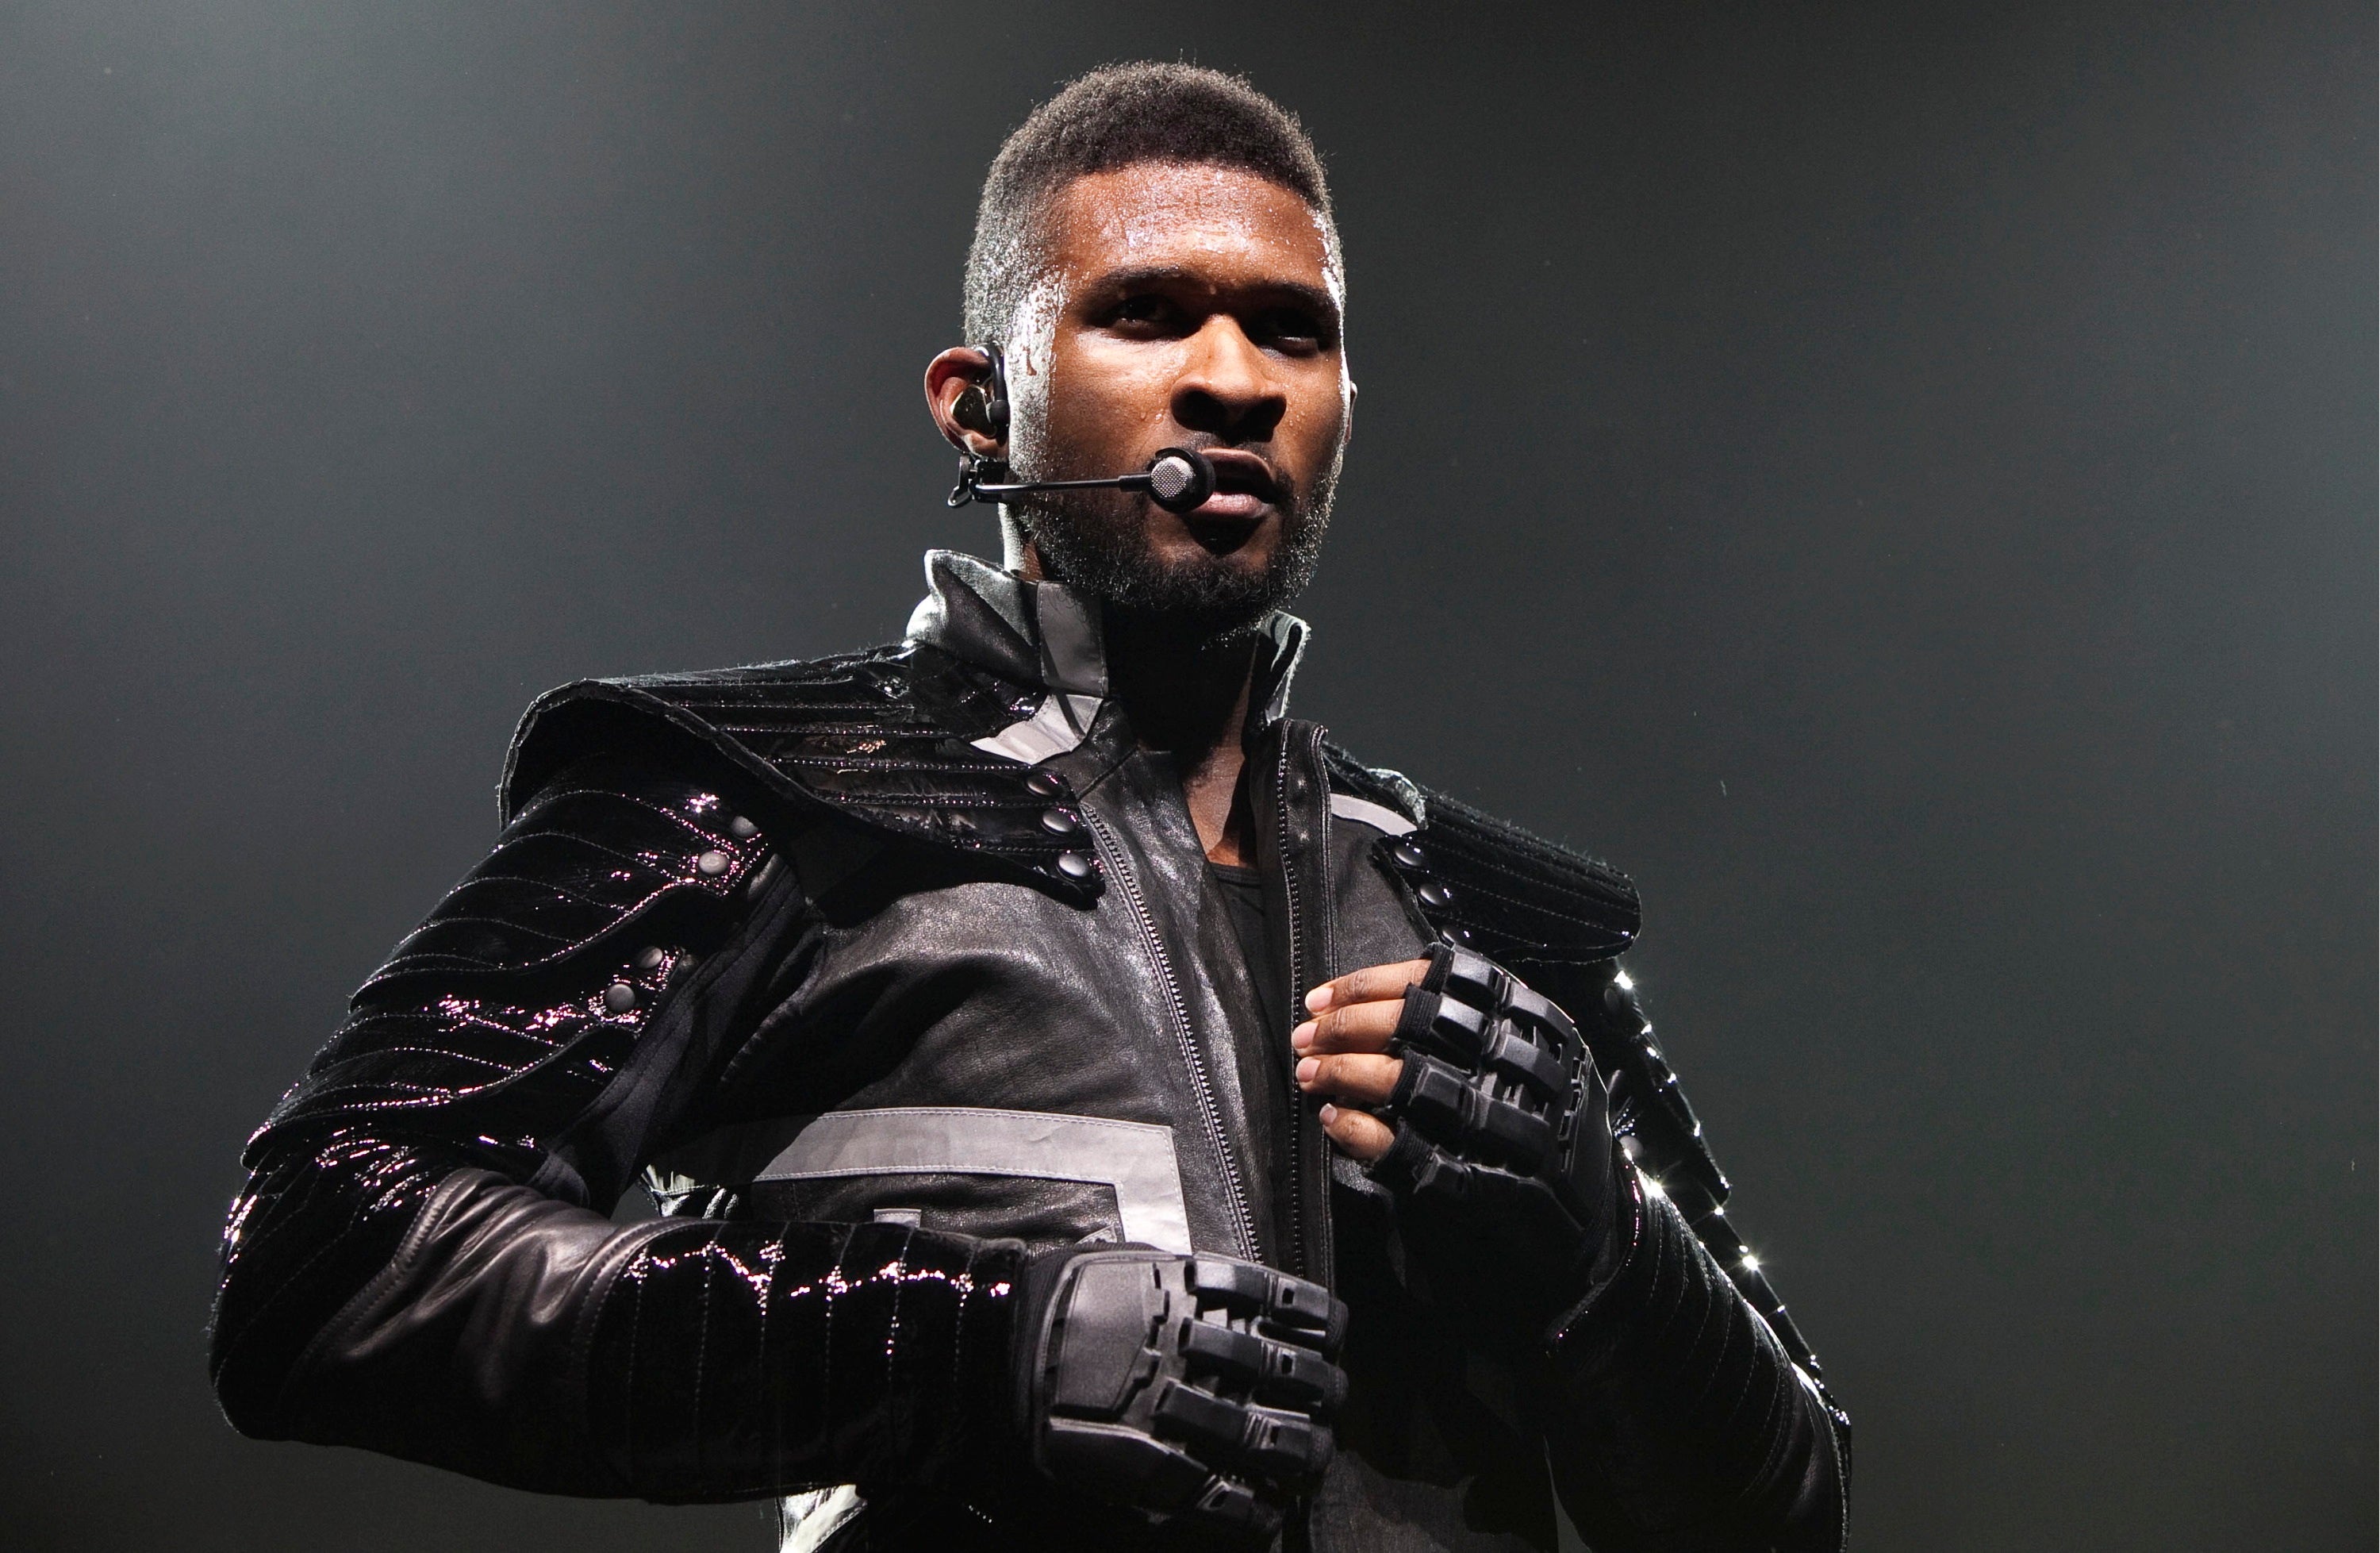 EMF 2011: 5 Questions for Usher